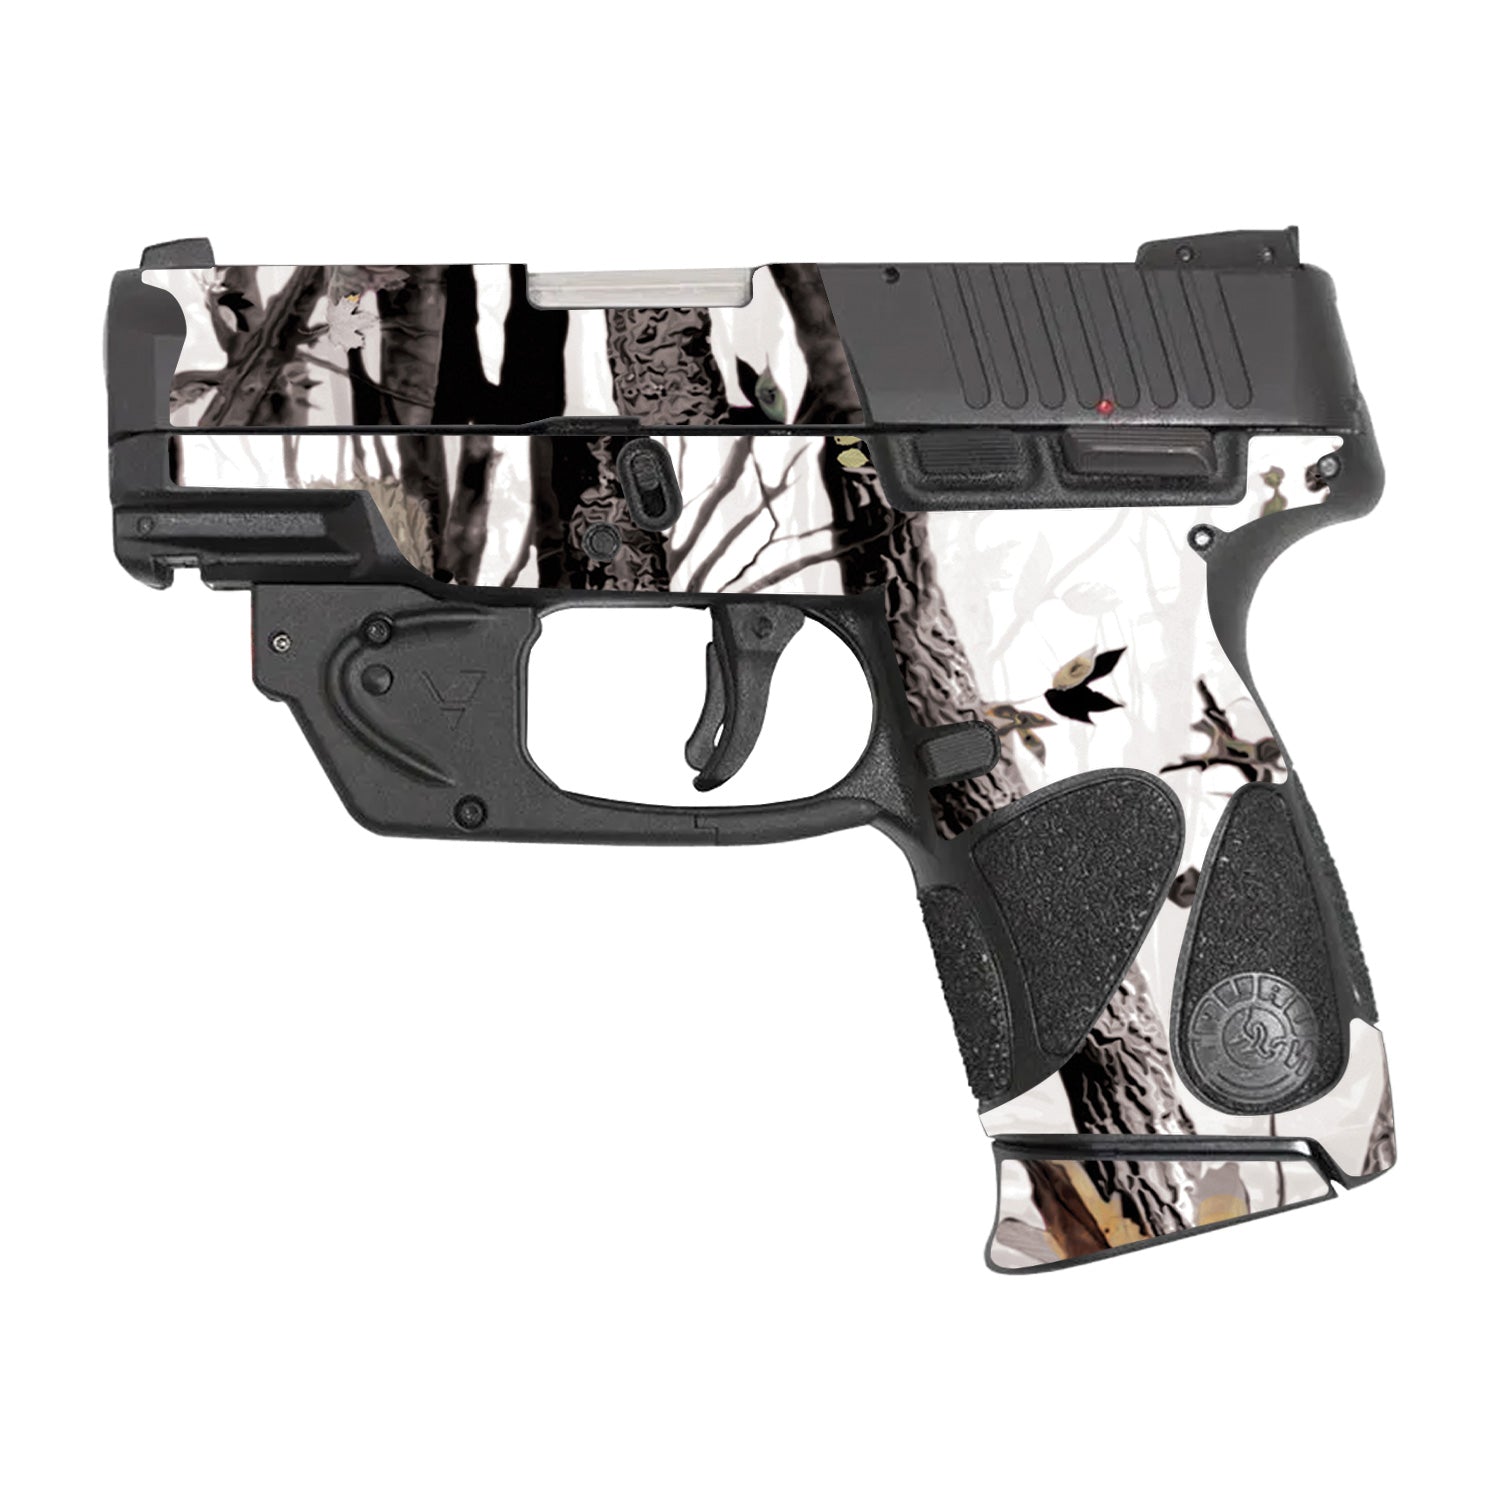  MIGHTY SKINS Compatible with Taurus PT111 Millennium G2/G2C/G2S  - Marble Glitz, Protective, Durable, and Unique Vinyl Decal wrap Cover, Easy to Apply, Remove, and Change Styles